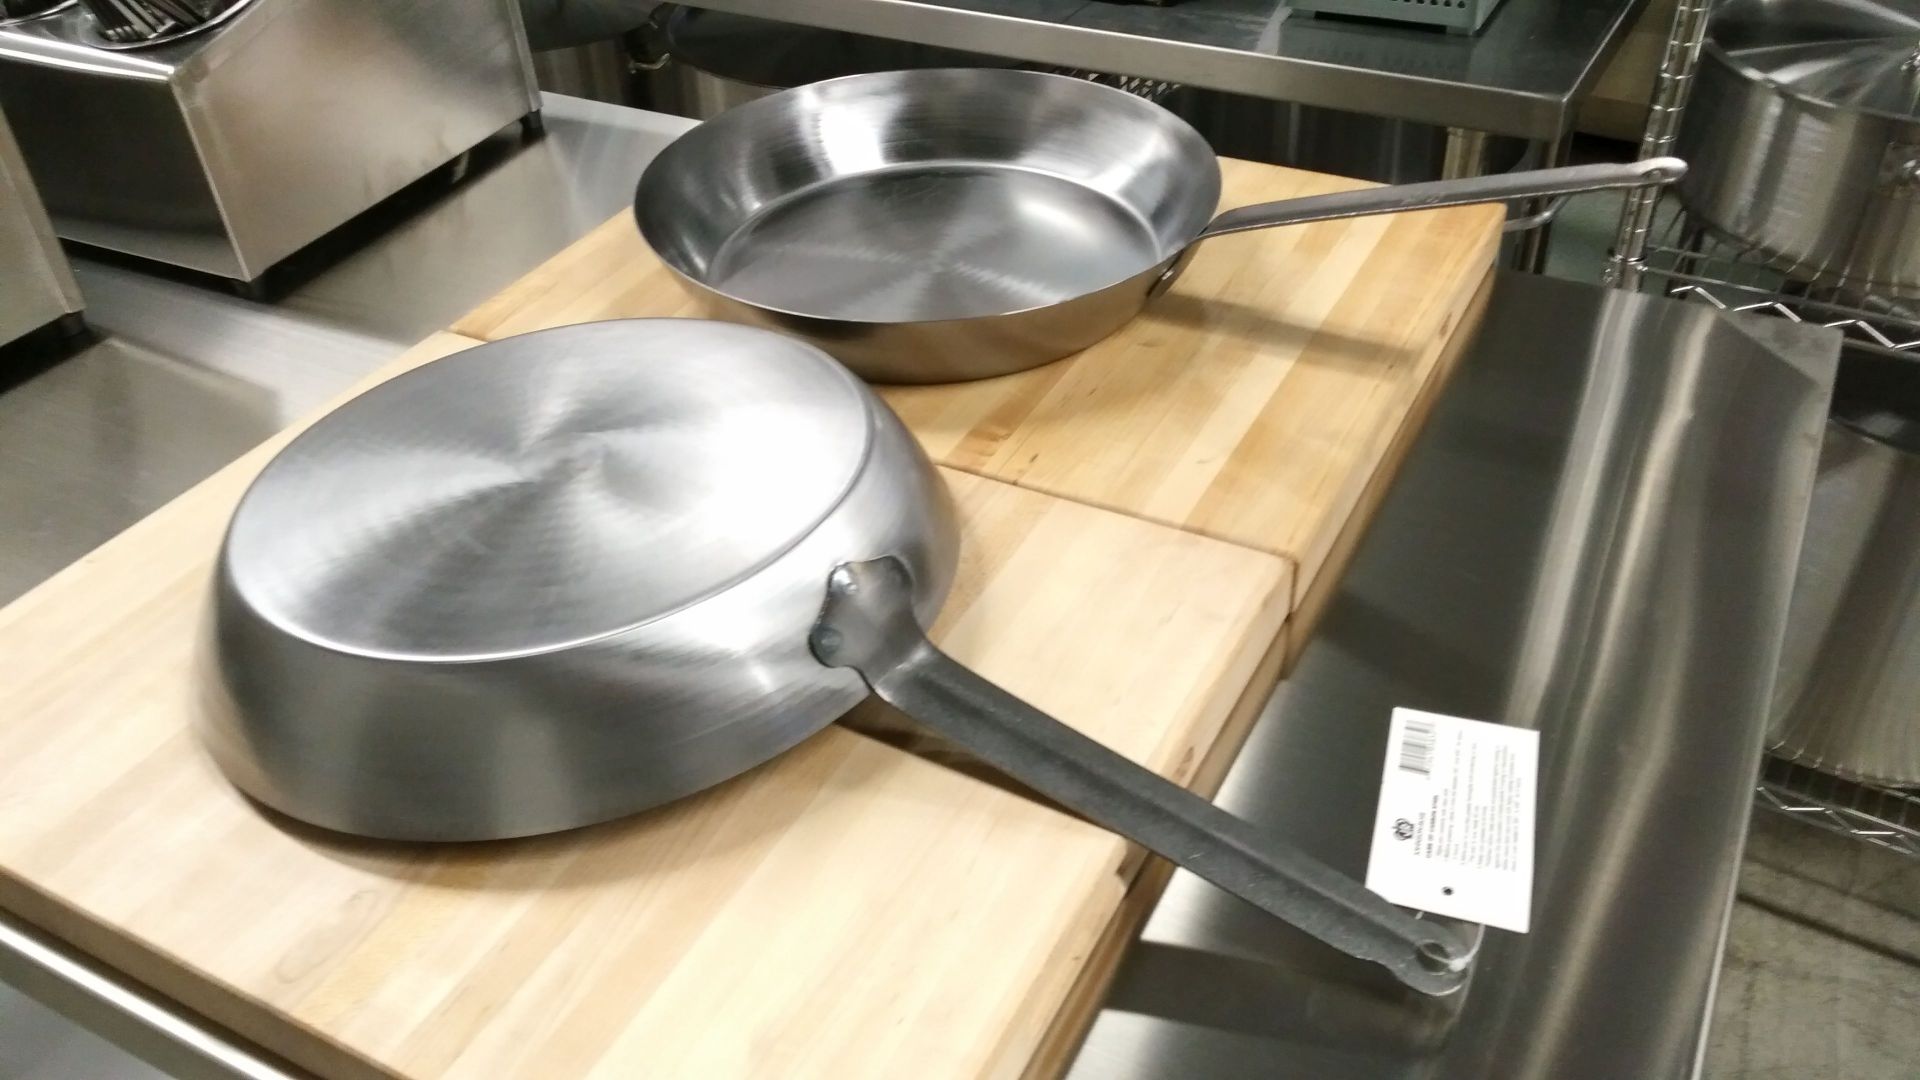 12.5" Carbon Steel Fry Pans Induction Capable - Lot of 2 - Image 4 of 4